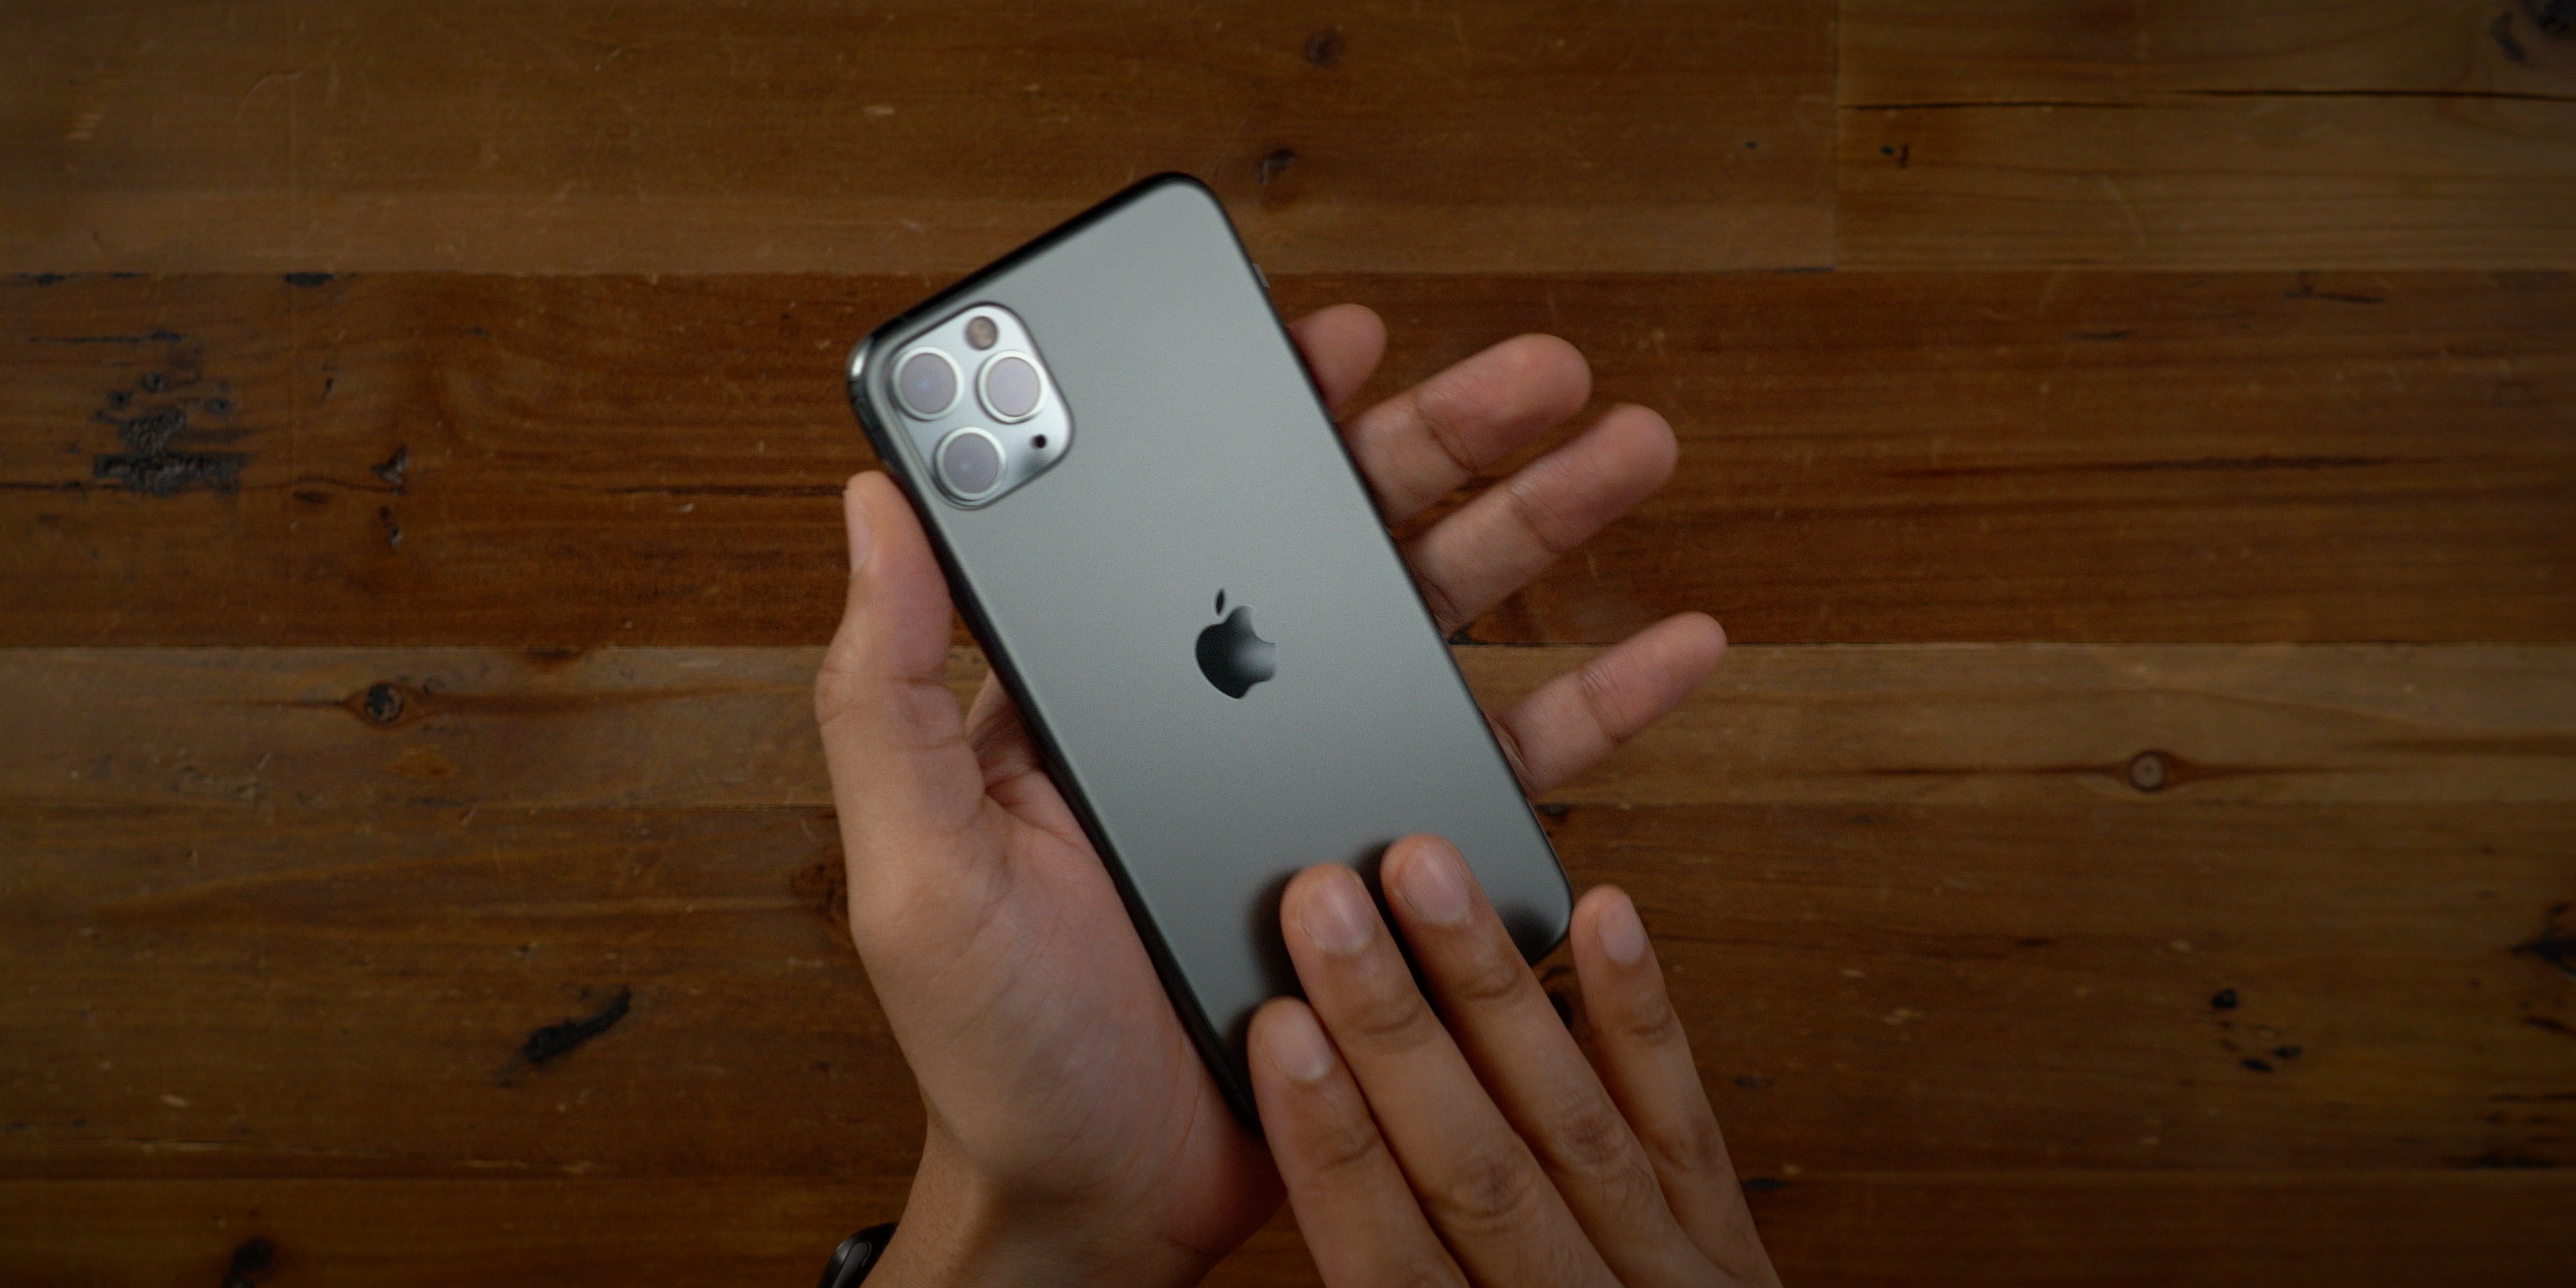 iPhone 11 Pro review: is it worth the significant price premium? - 9to5Mac